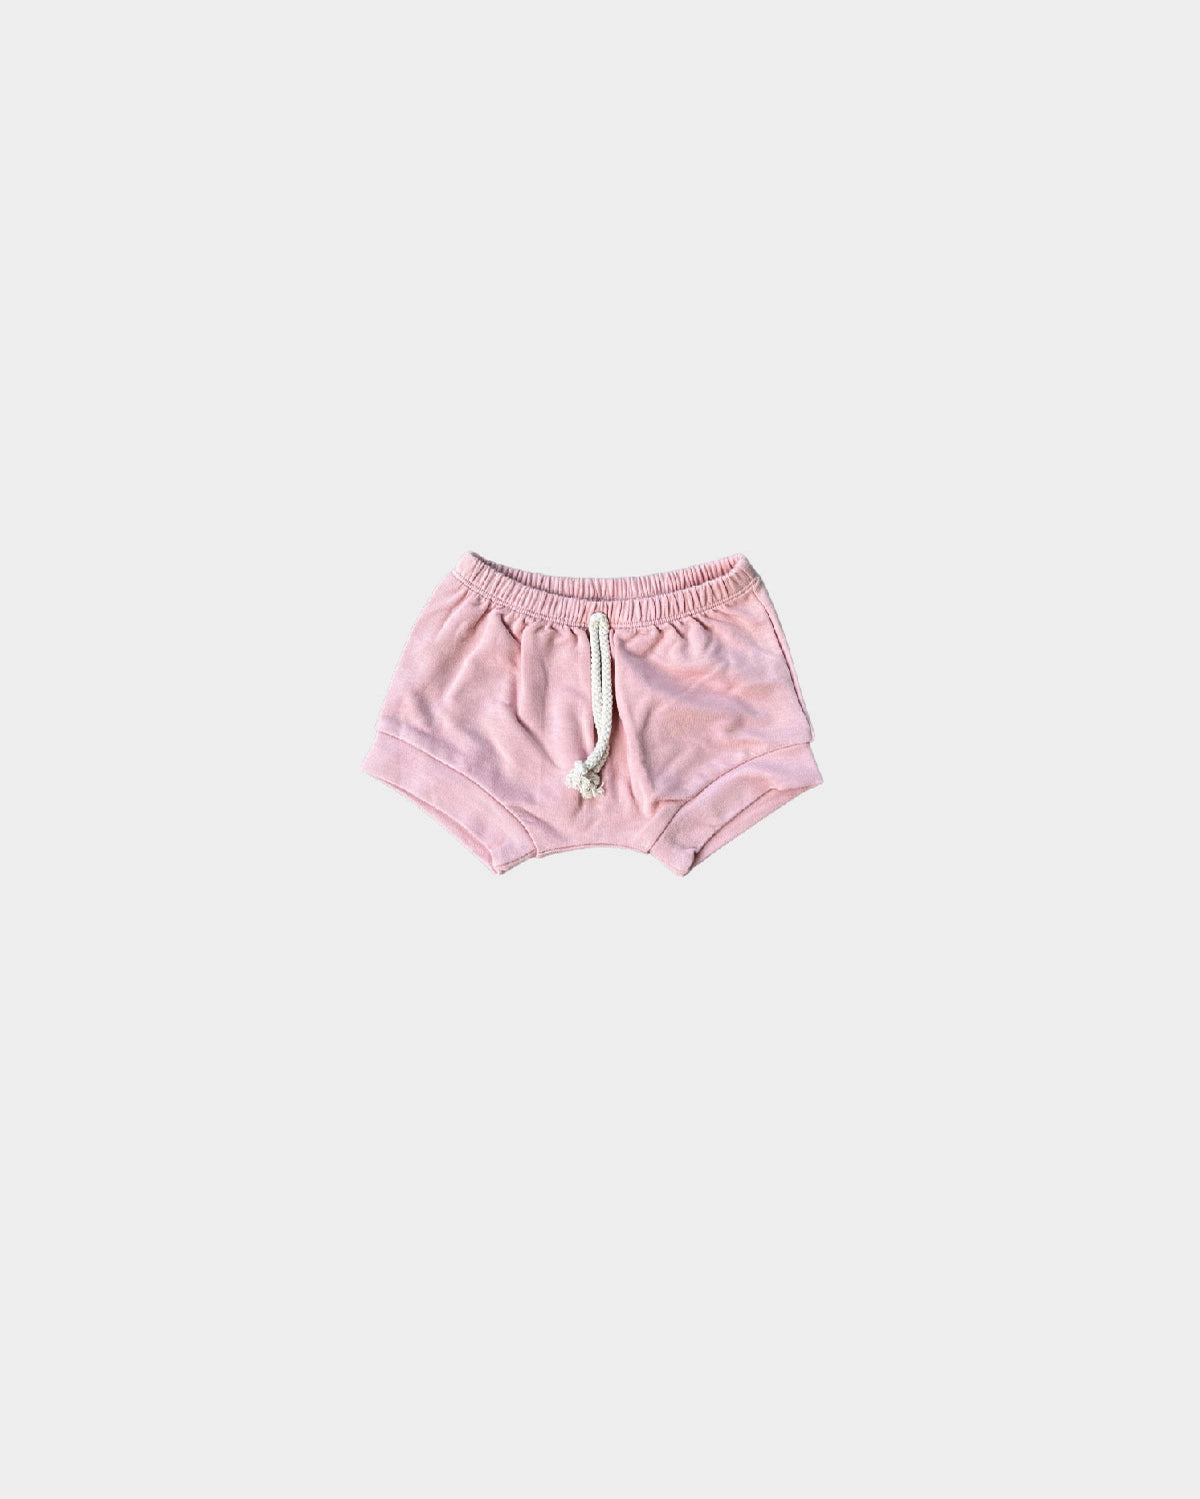 Babysprouts Clothing Company Girl's Shorties - Misty Pink